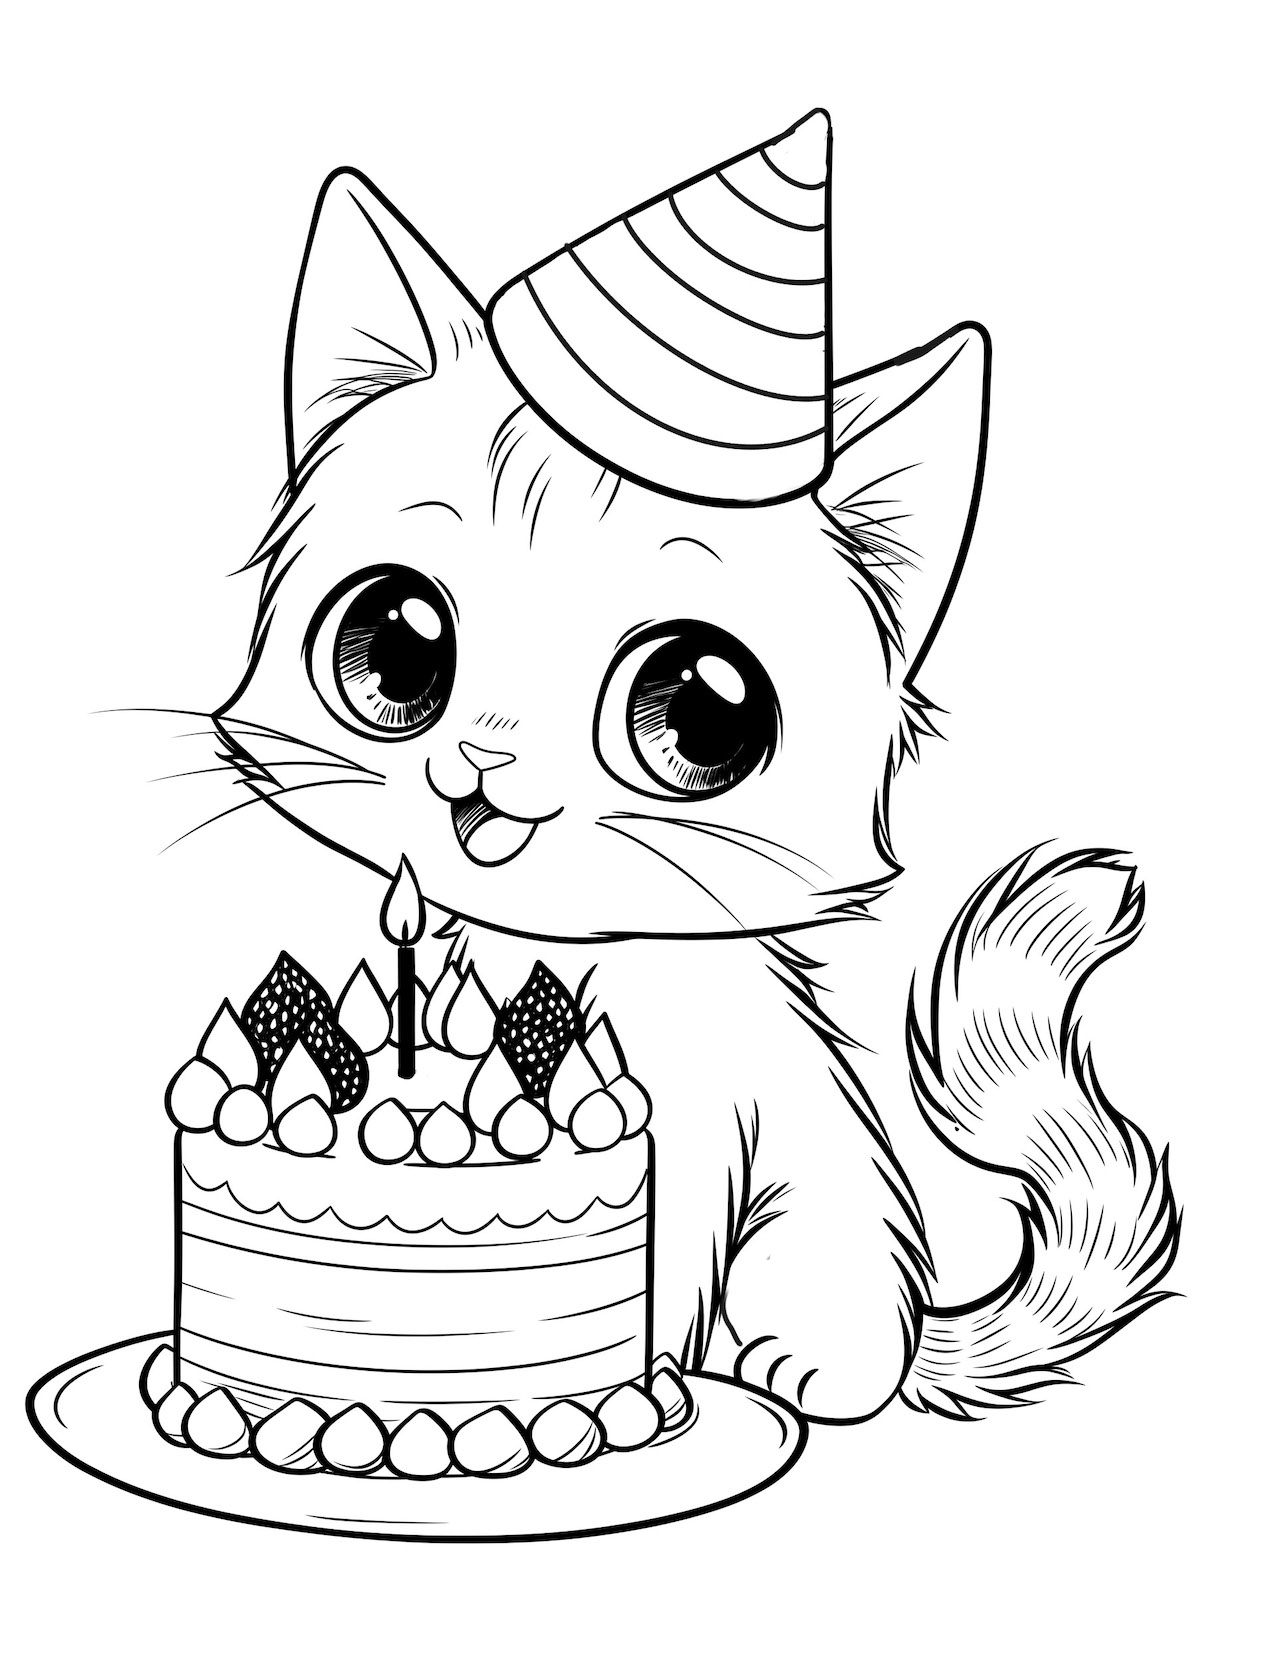 76 Cute Cat Coloring Pages For Kids and Adults - Our Mindful Life